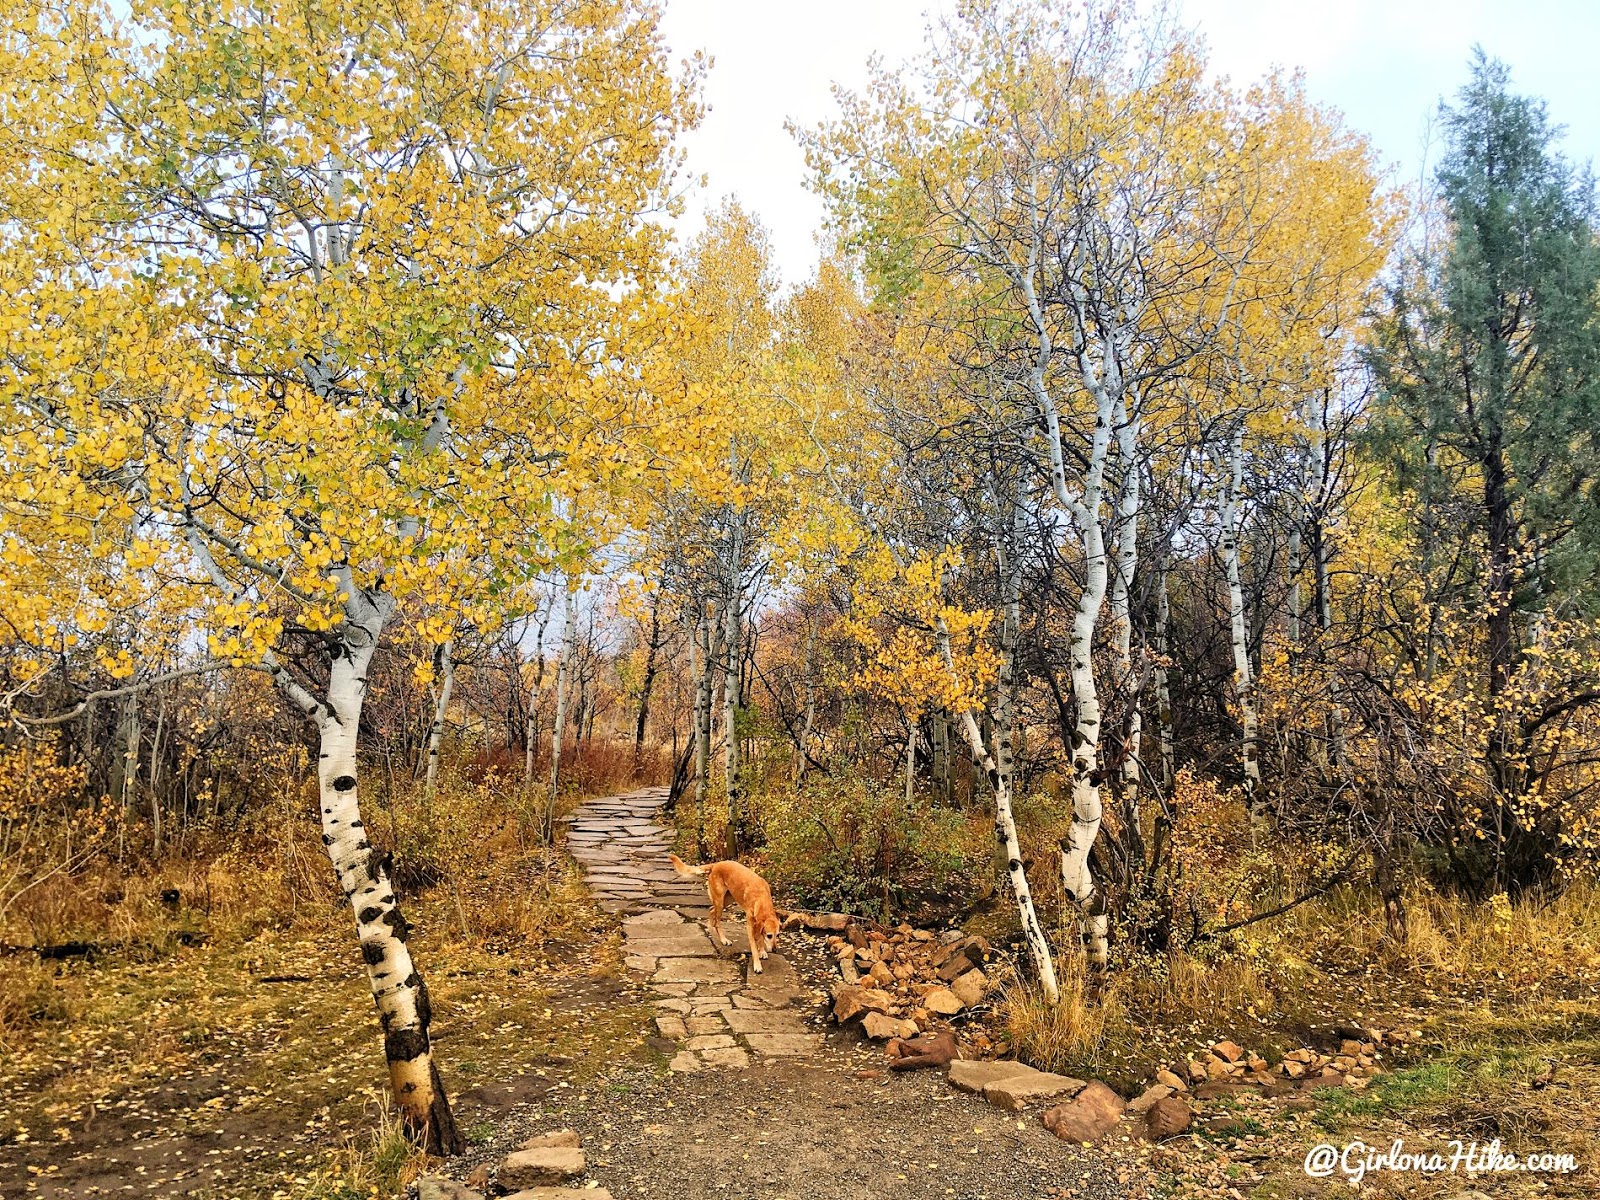 Run-a-Muk Dog Park & Trail, Kimball Junction, Park City, Utah. Hiking in Utah with Dogs